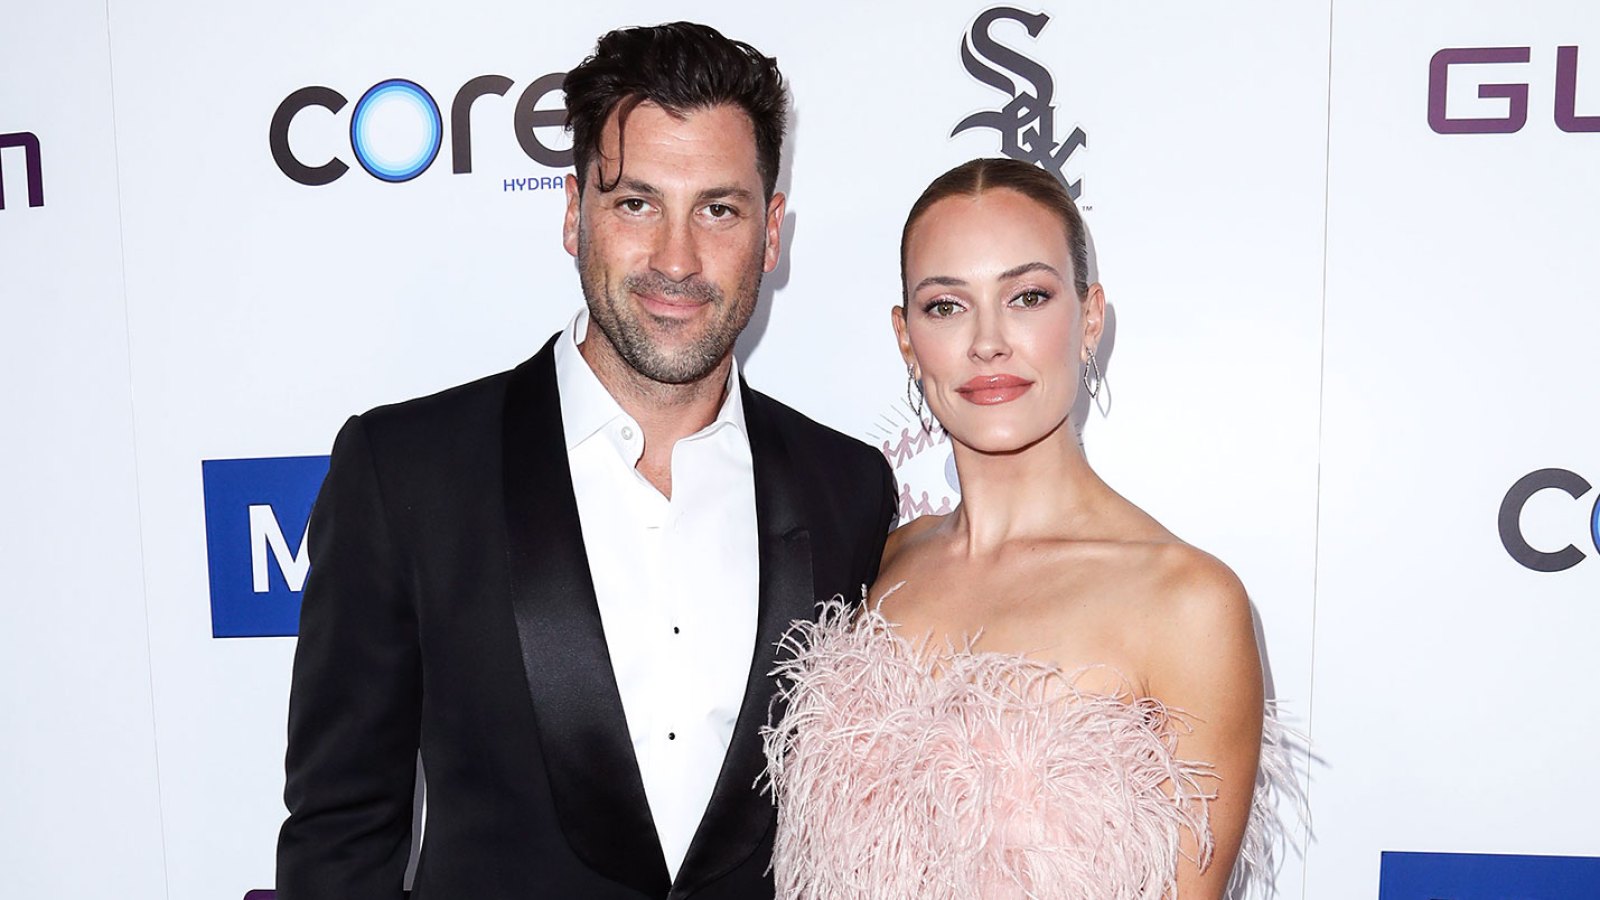 Peta Murgatroyd Reveals She Suffered 3 Miscarriages While Maks Chmerkovskiy Was in Ukraine